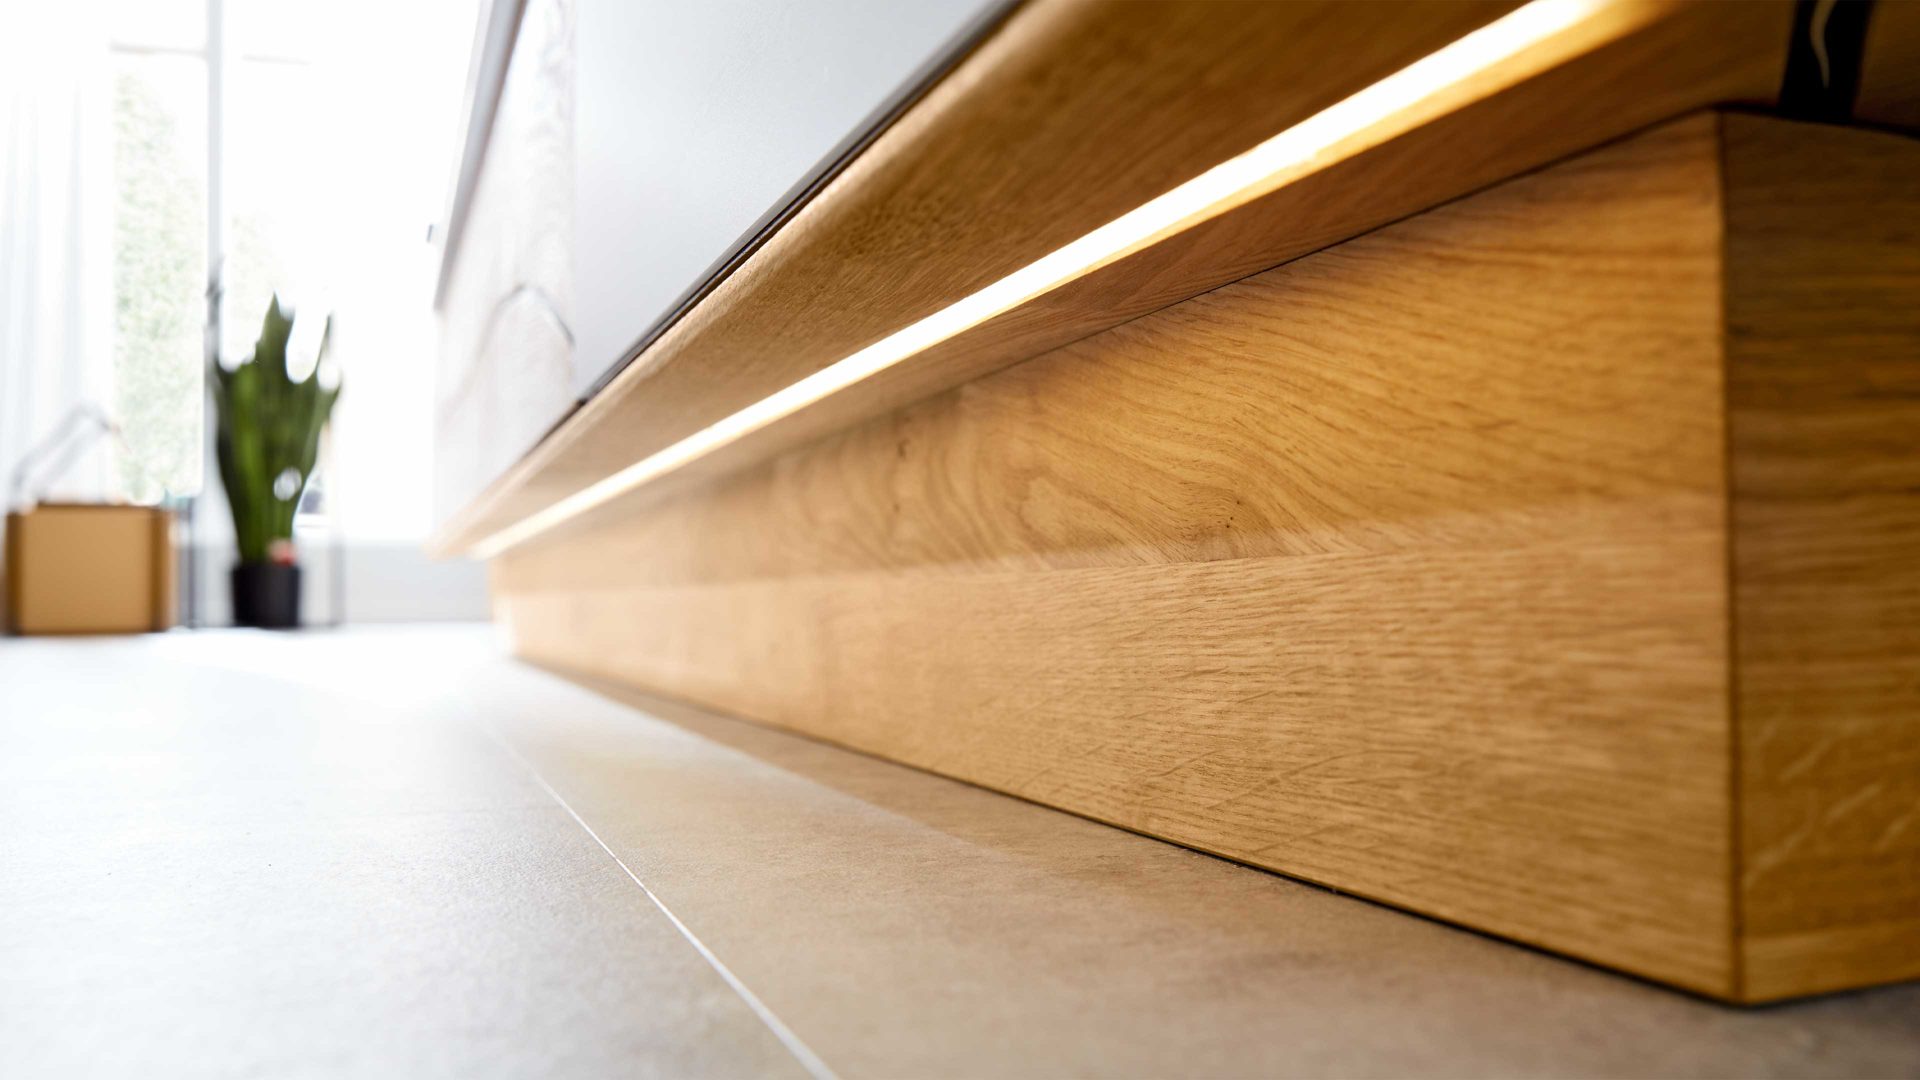 LED-Beleuchtung Interliving aus Holz in Weiß Interliving Wohnzimmer Serie 2020 - Unterbaubeleuchtung 195054 19,8 Watt